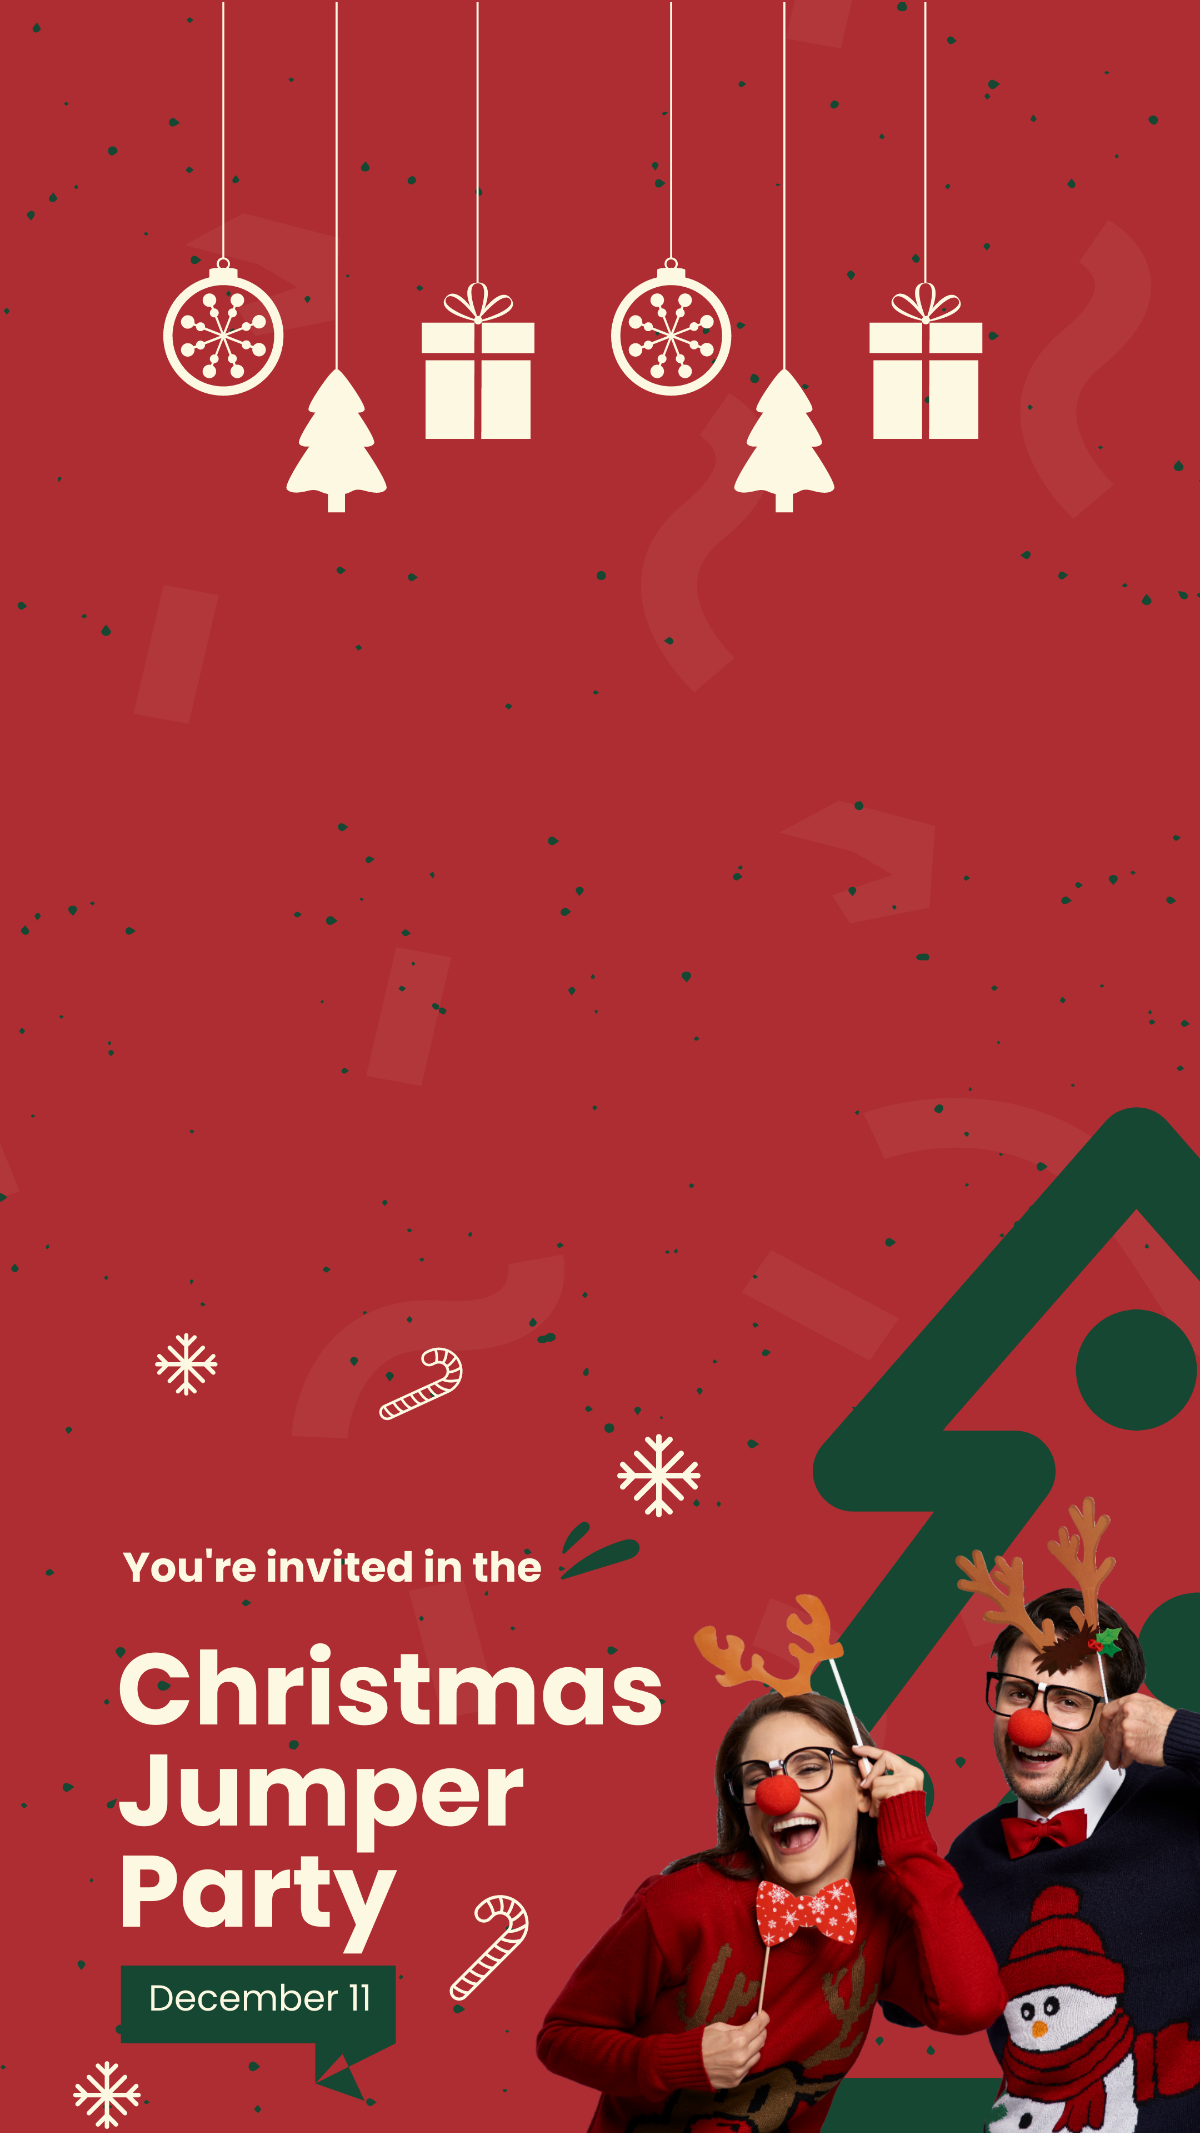 Christmas Jumper Party Snapchat Geofilter